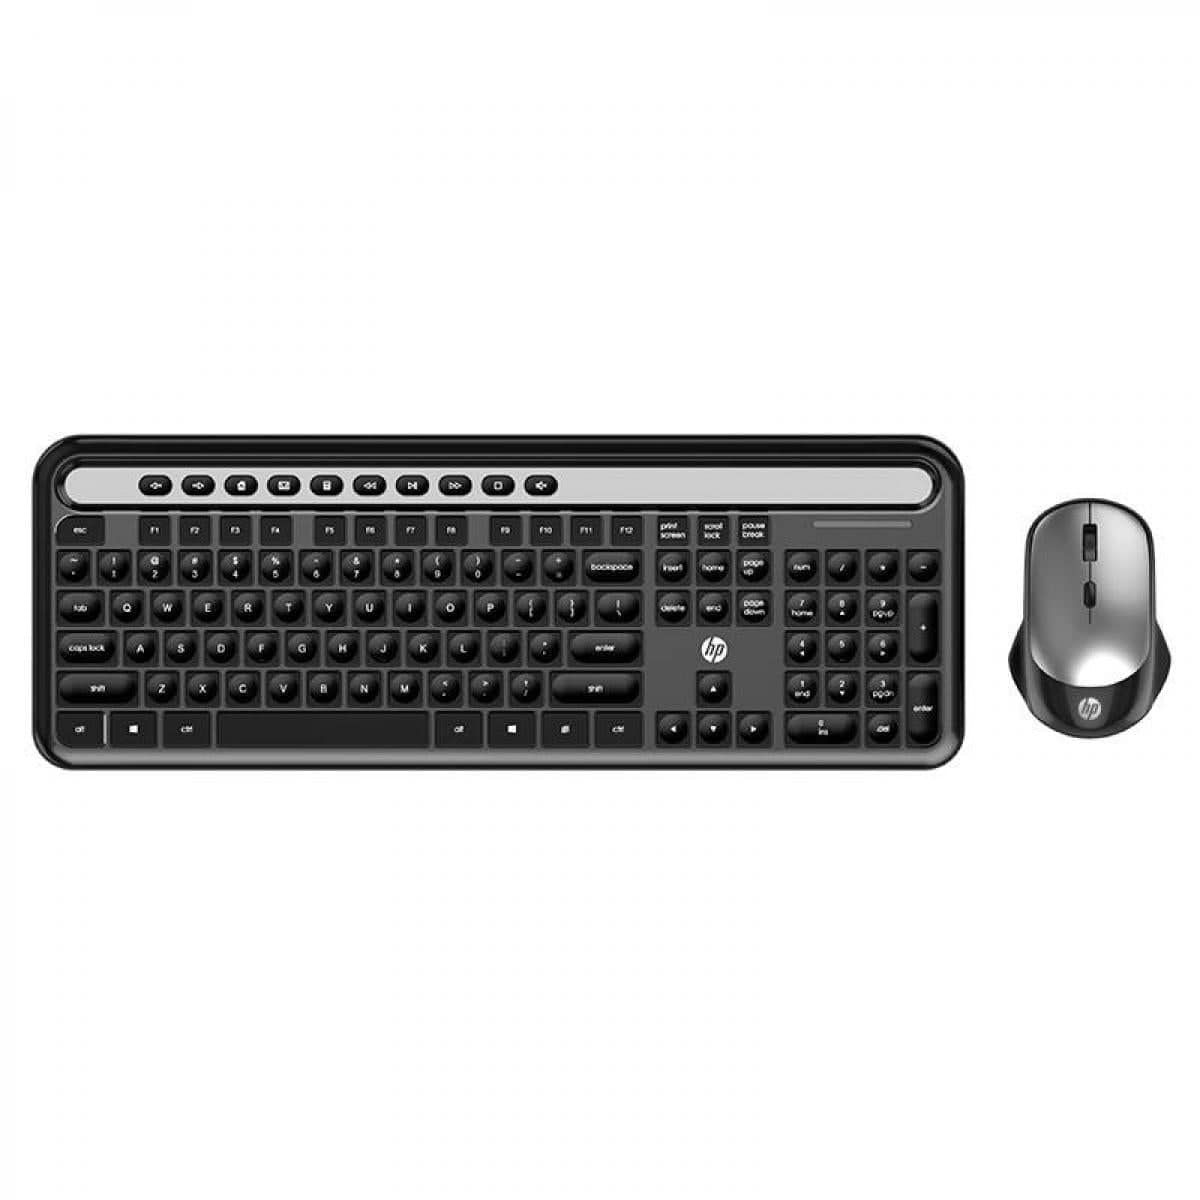 HP accesories HP CS500 Wireless Keyboard and Mouse Combo